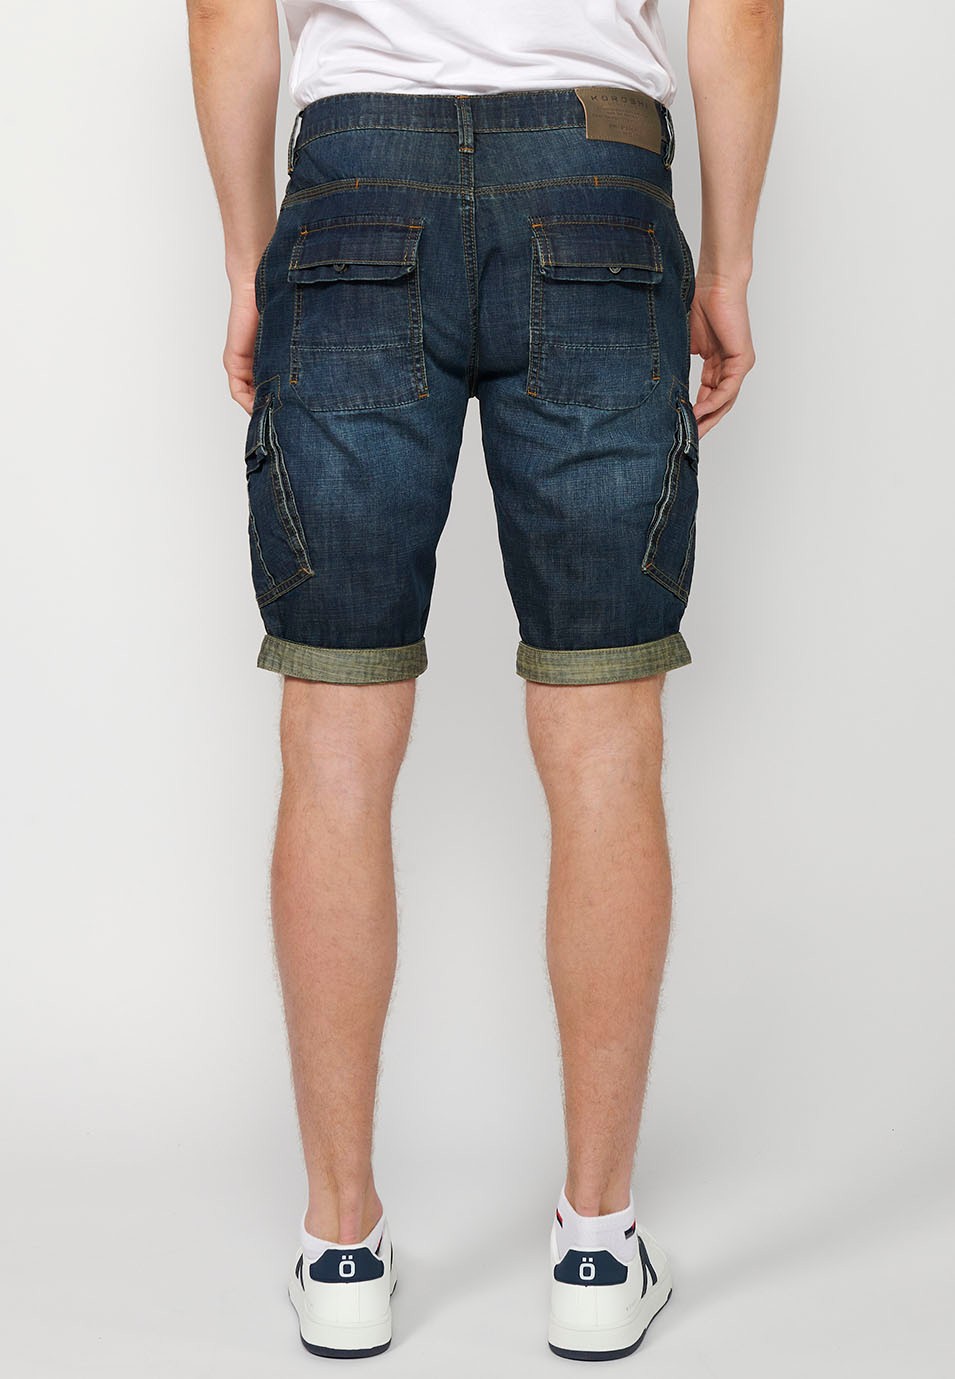 Blue Denim Bermuda Shorts with Side Cargo Pockets and Front Closure with Zipper and Button for Men 6